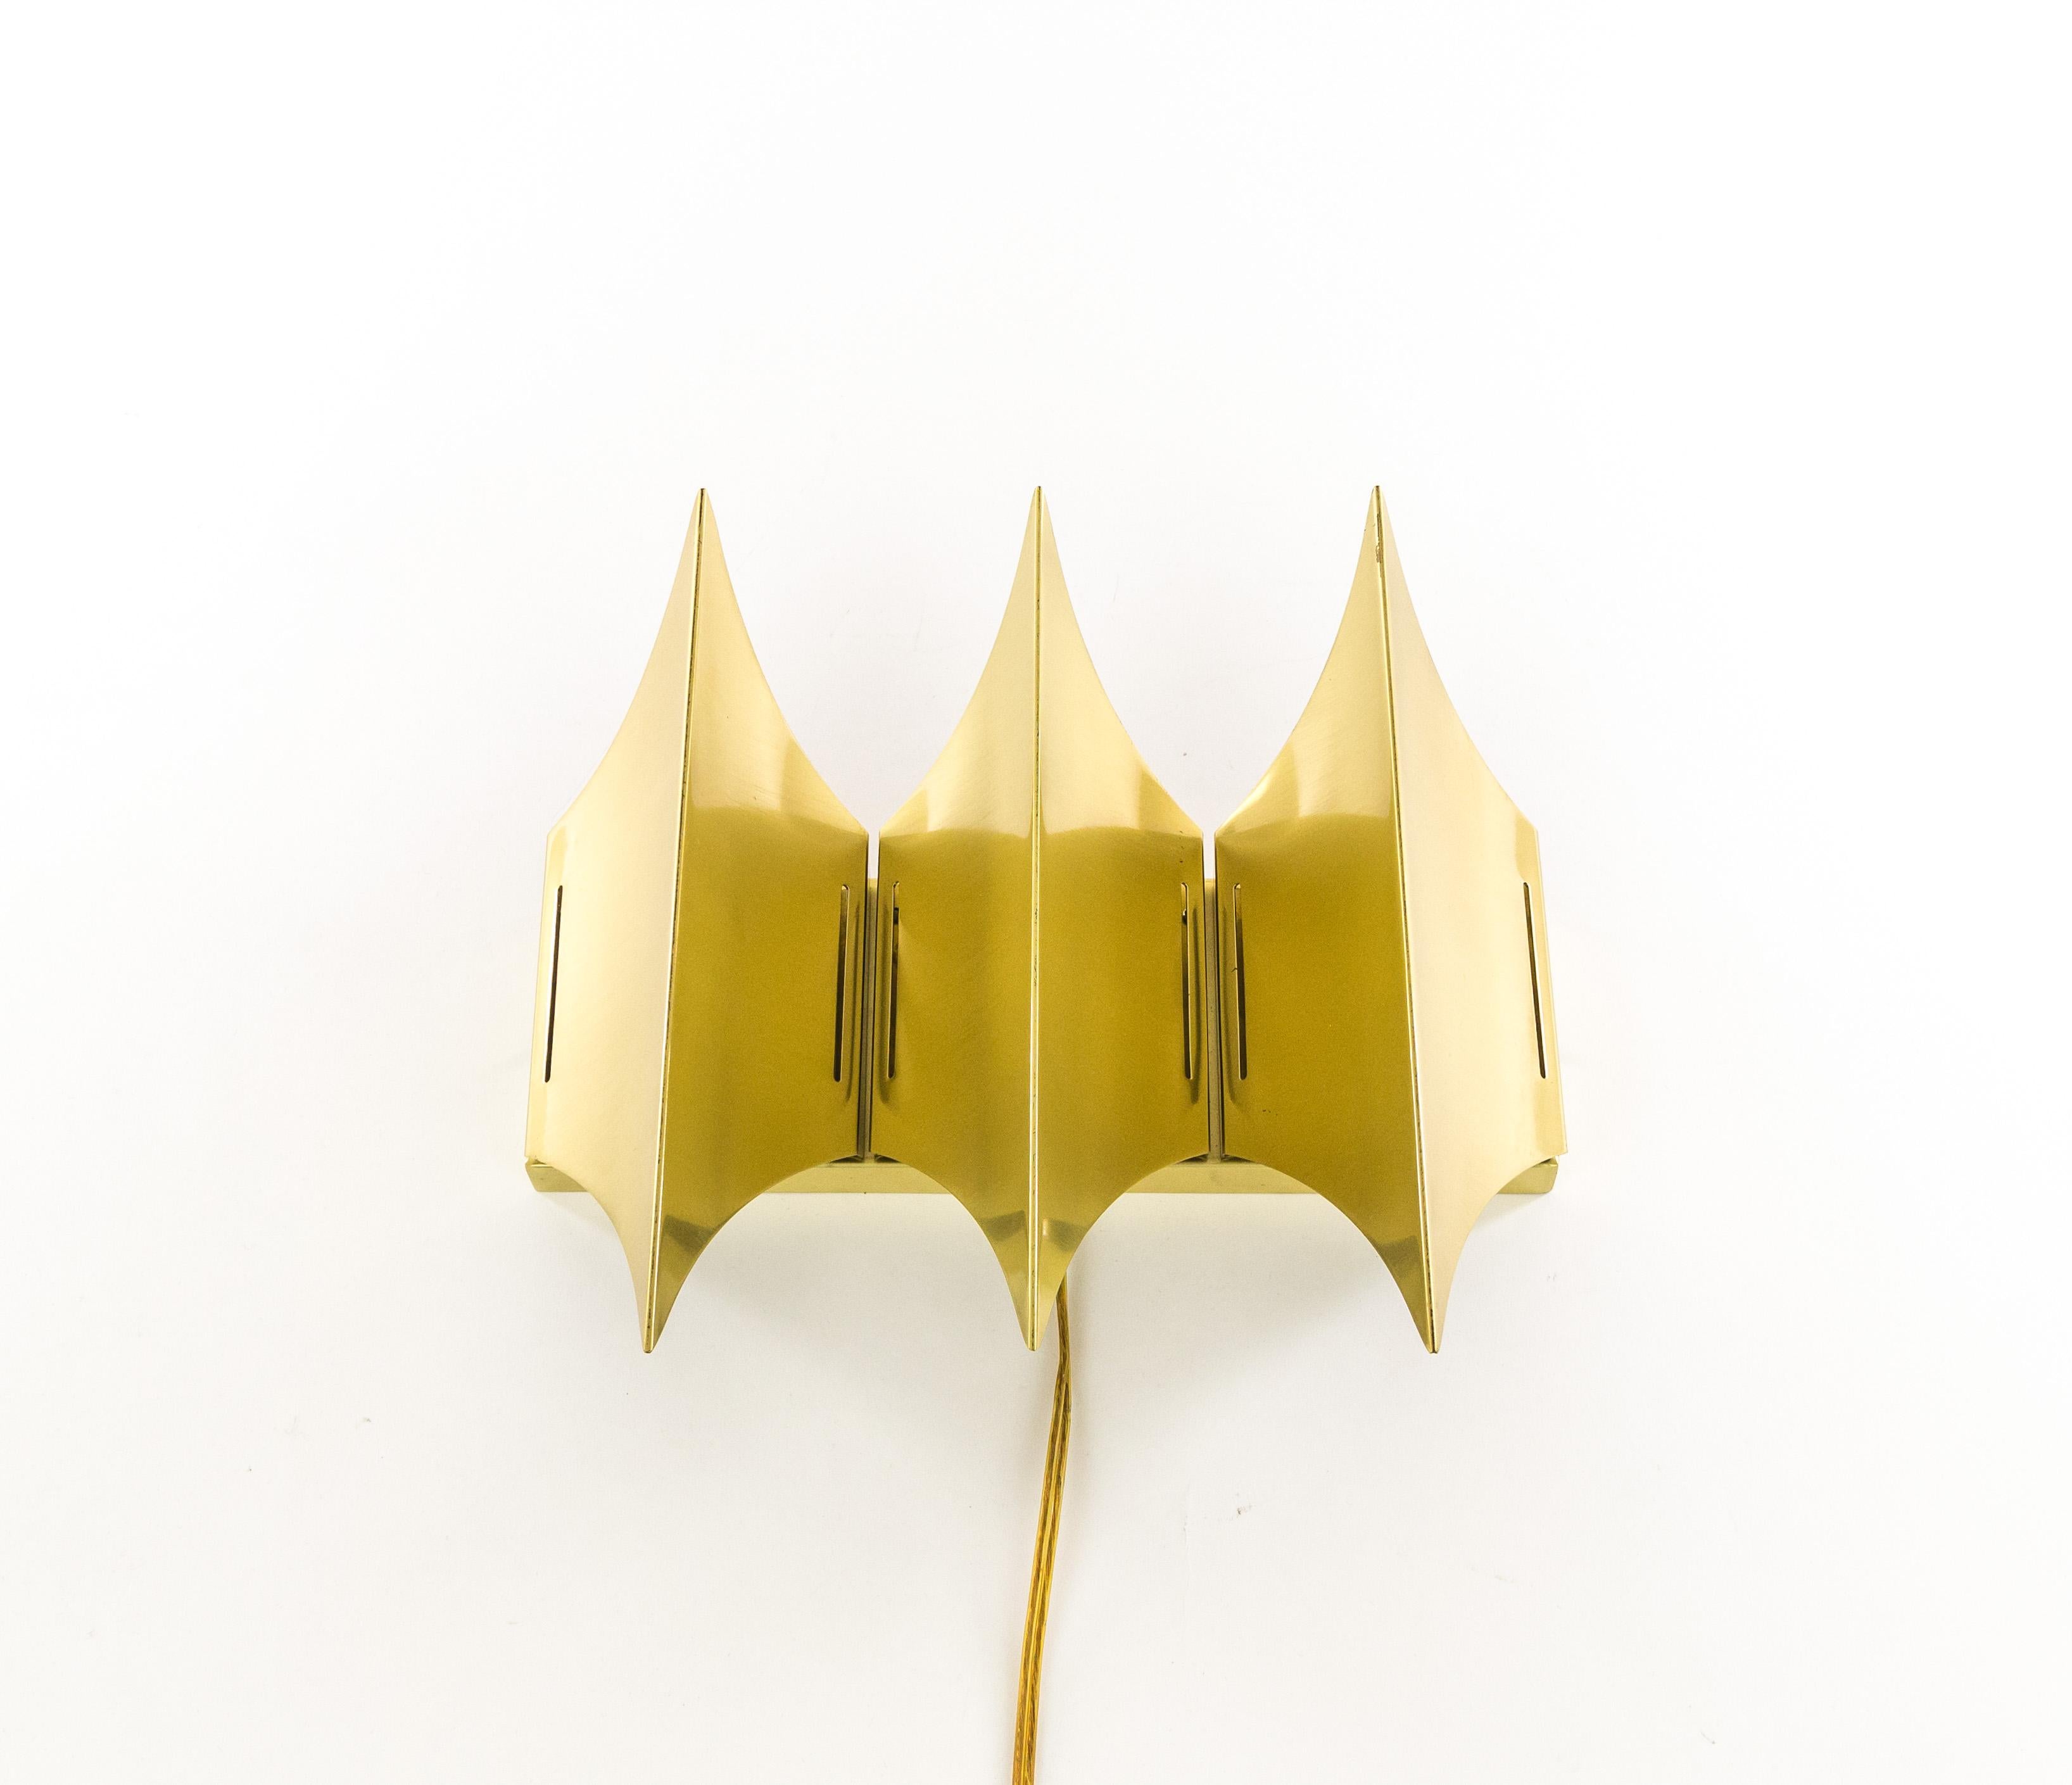 Sculptural wall lamp Gothic III produced by Danish lighting company Lyfa, with three-light sources. The lamp has been designed and manufactured halfway the 1960s. This lamp is made of brushed solid brass that accentuates the three horizontal